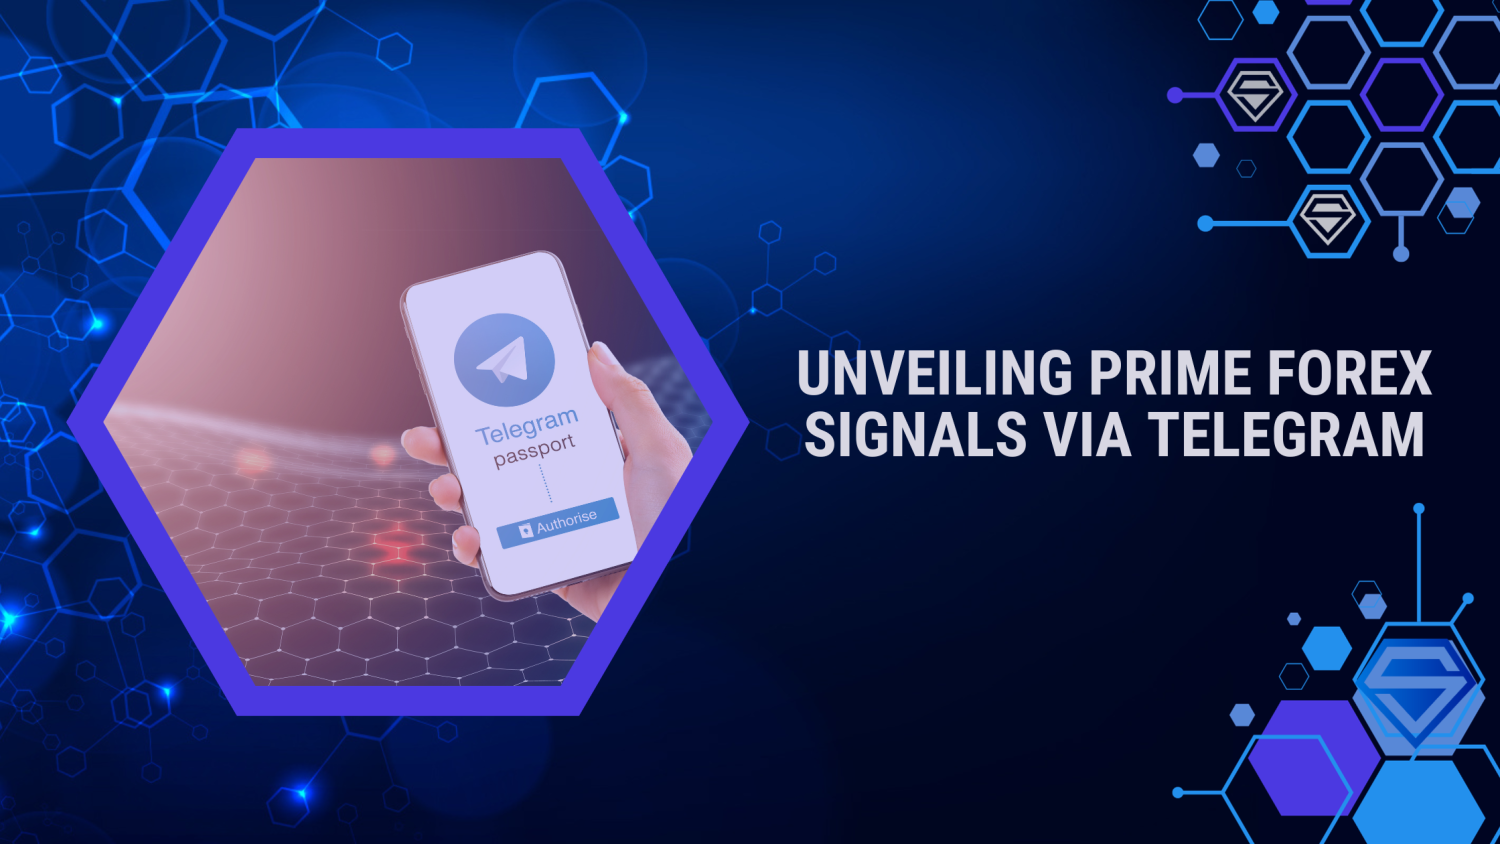 Forex Signals on Telegram: How to Find the Best Ones